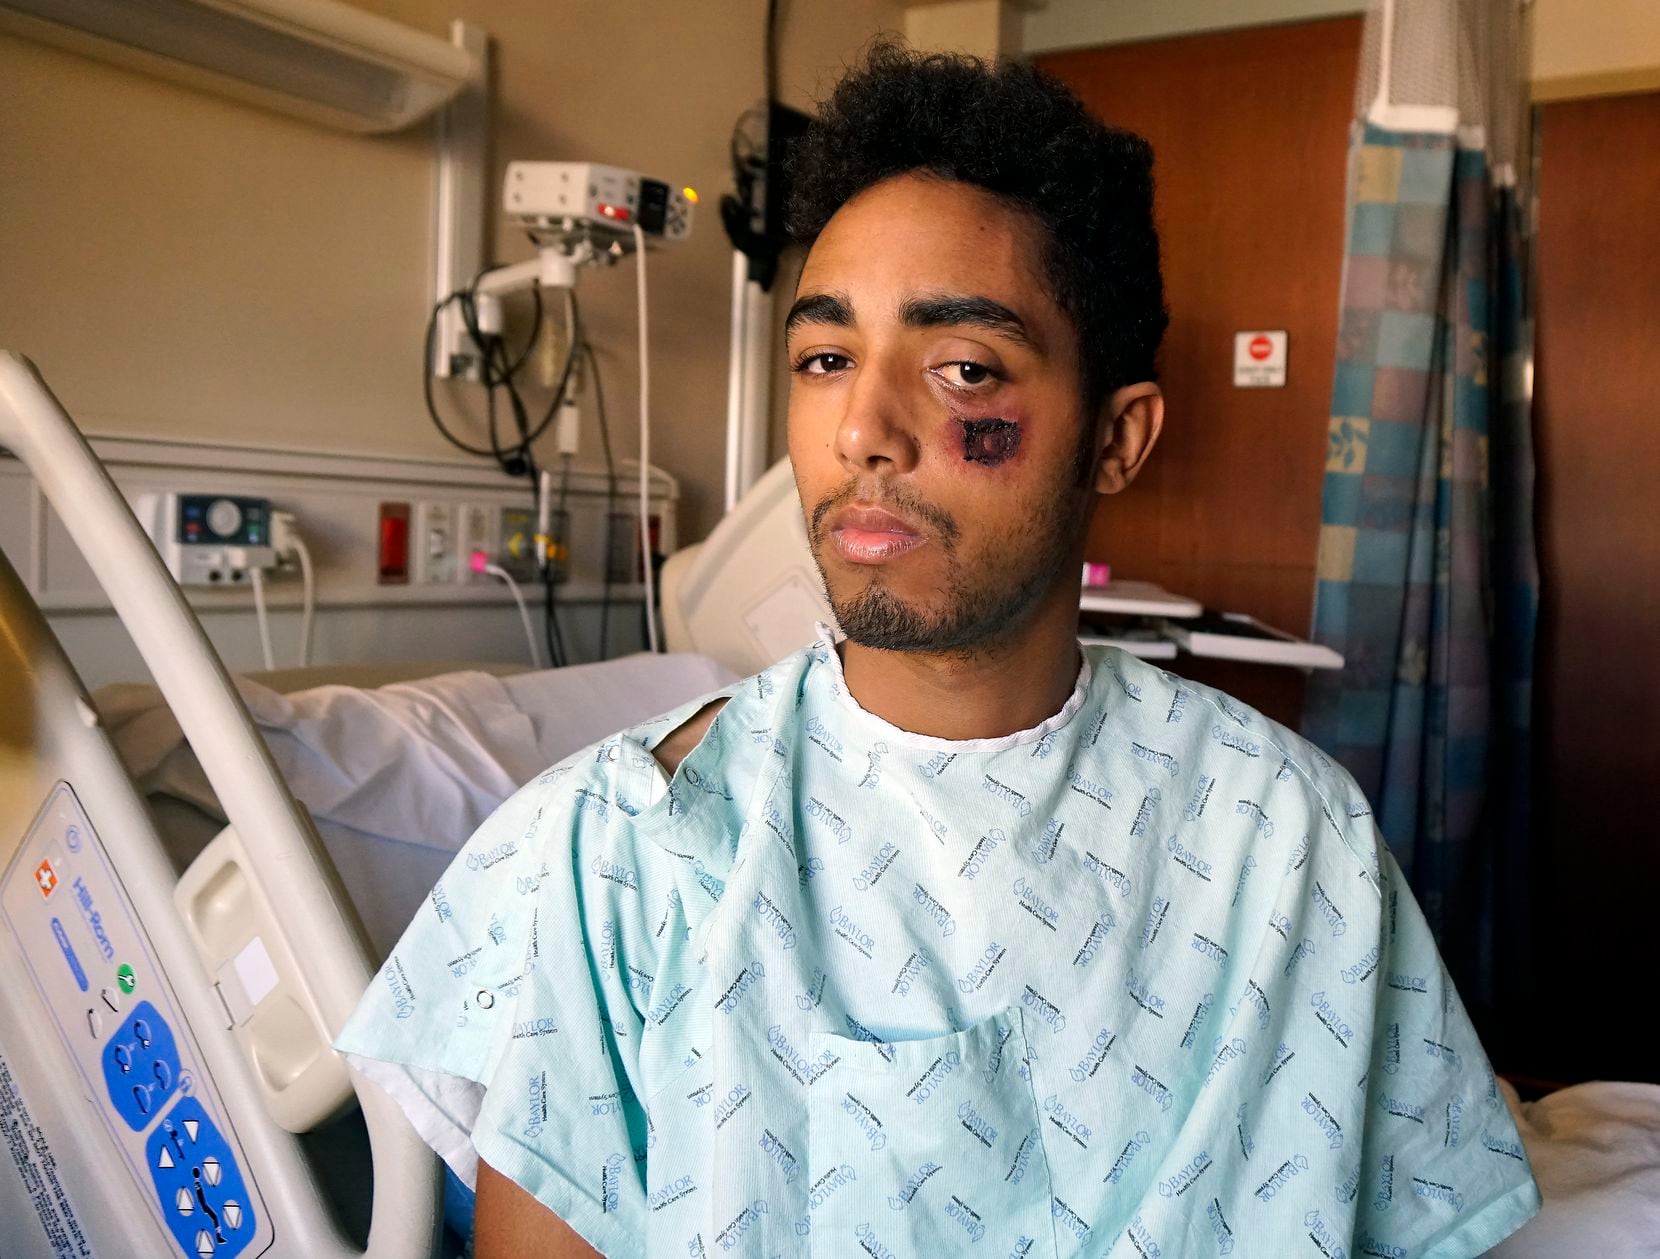 Vincent Doyle said he was struck by a so-called less lethal bullet during a May 30, 2020,...